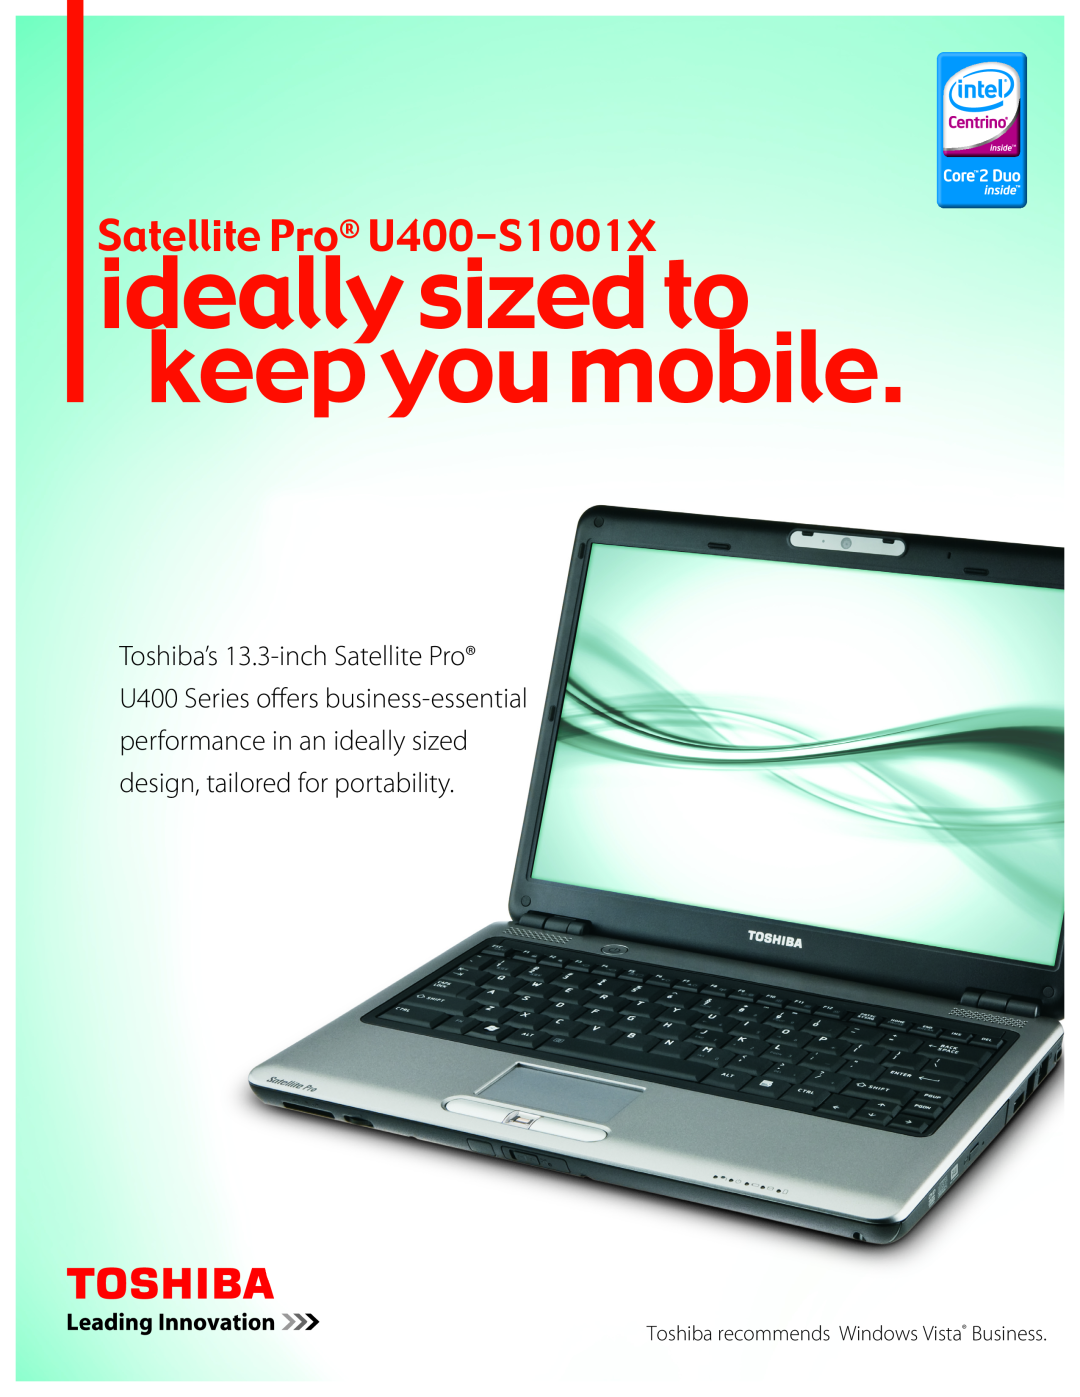 Toshiba manual ideally sized to keep you mobile, atellite Pro U400-S1001X, Toshiba recommends Windows Vista Business 